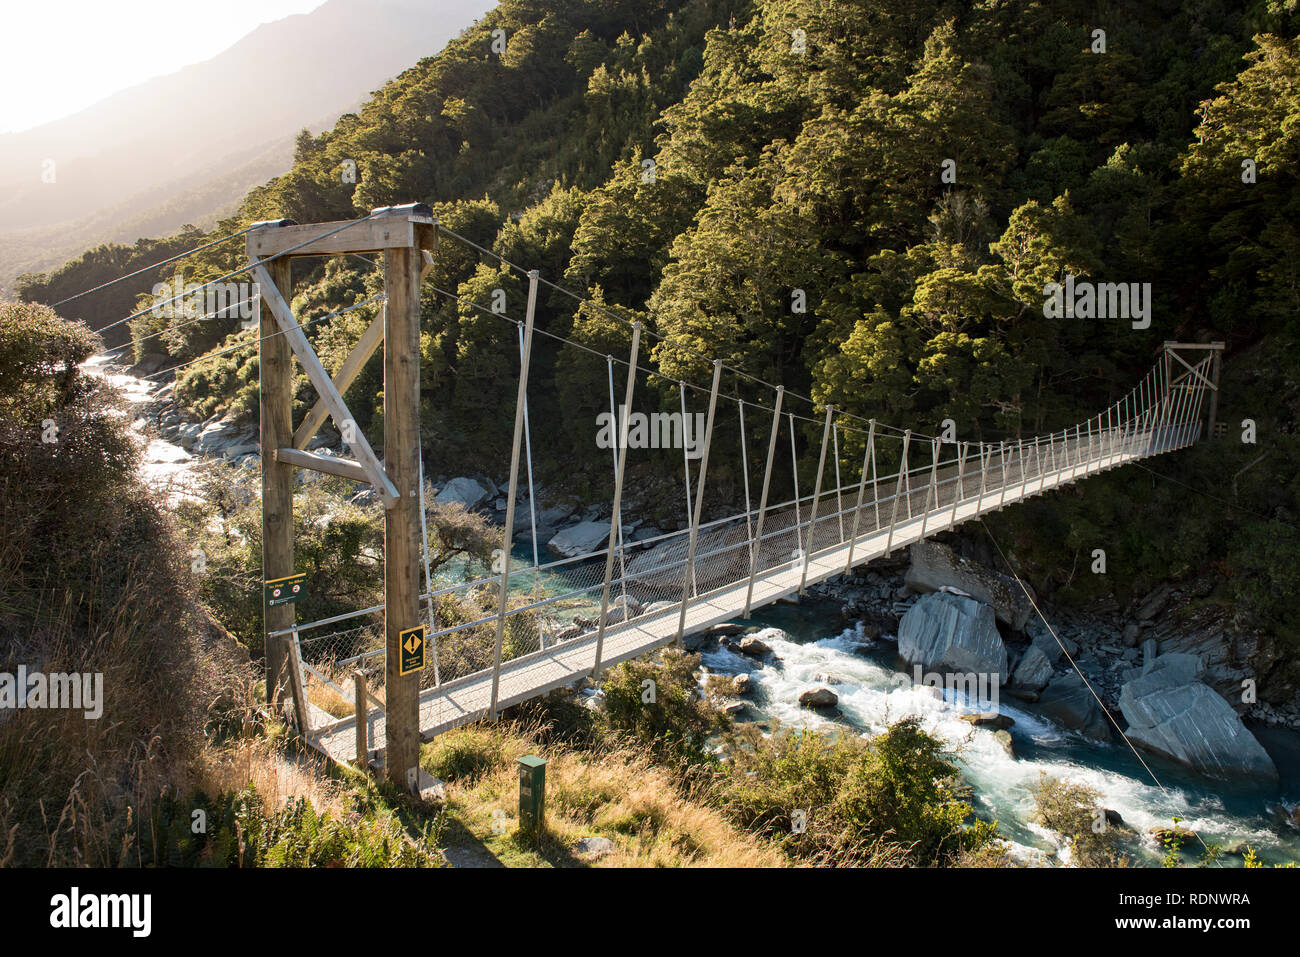 The beginning of the Rob Roy Glacier Track leads hikers over the Matukituki River via a swing bridge into a beech forest in the Matukituki Valley near Stock Photo